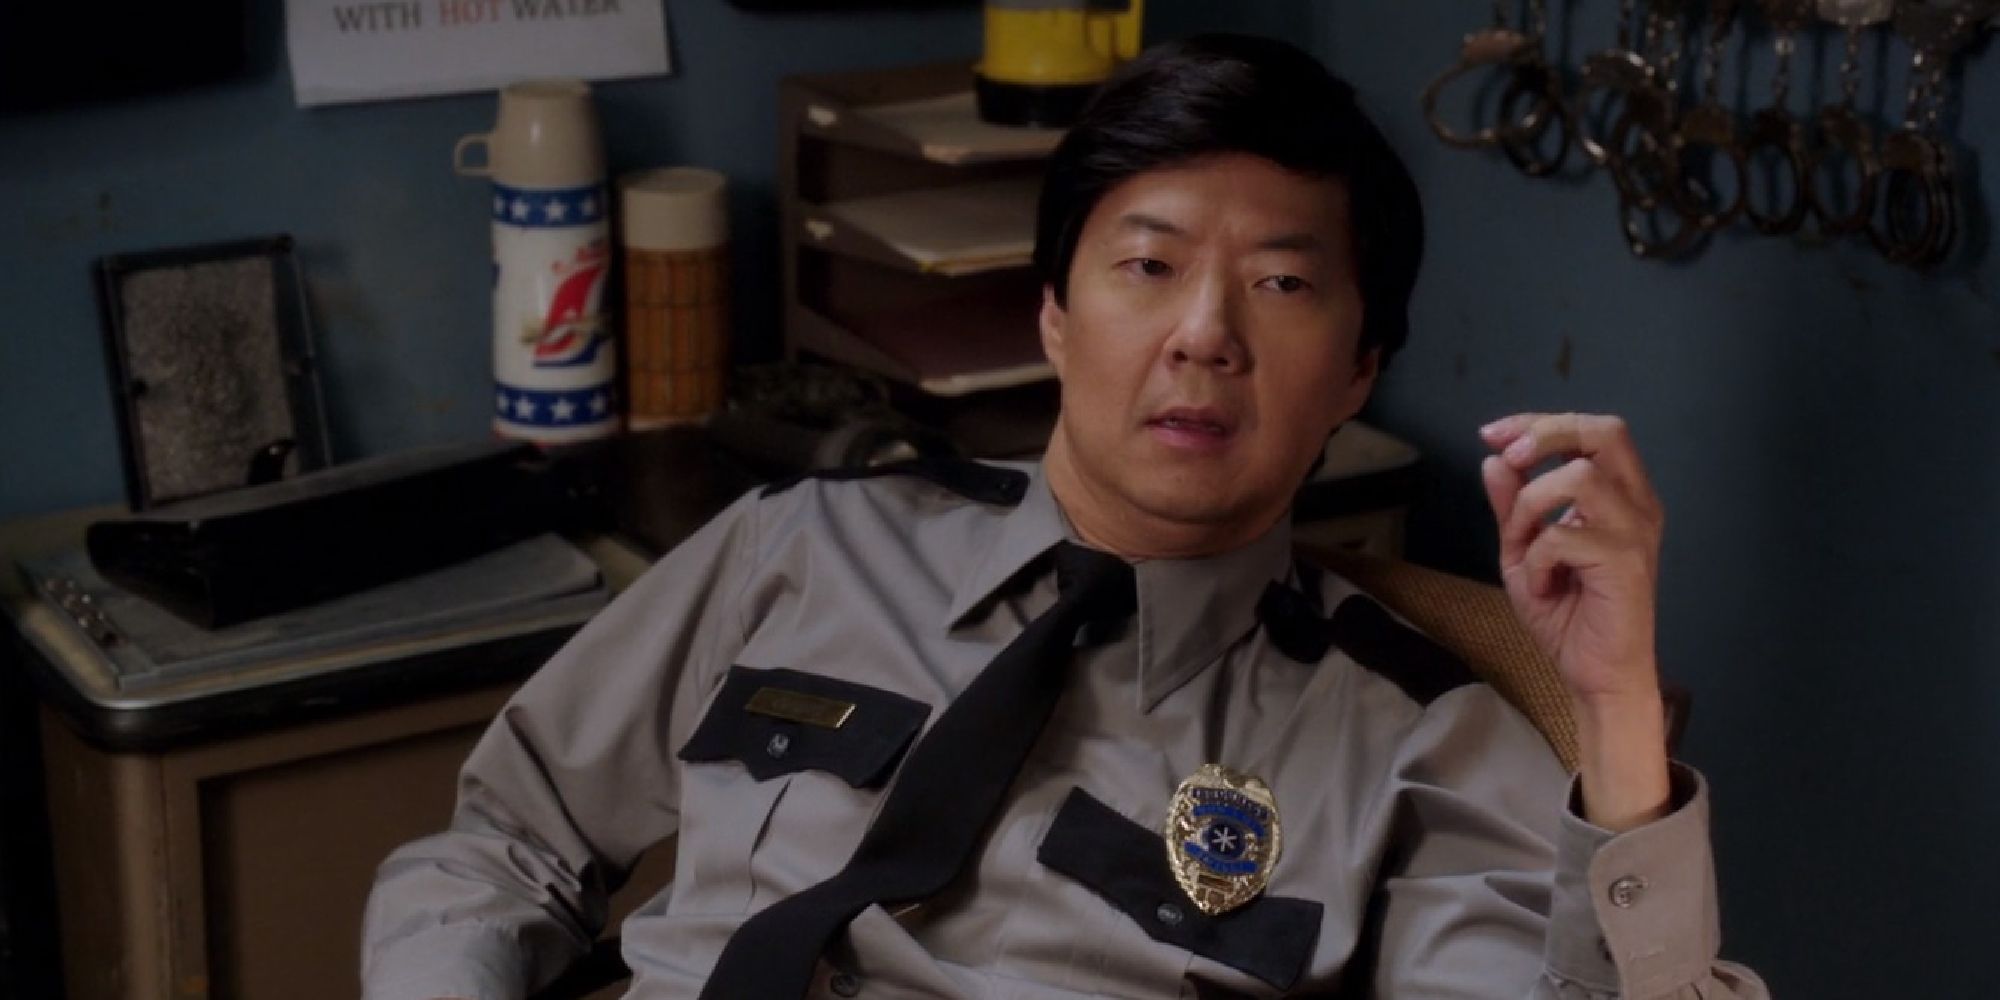 Chang sitting in his security uniform in Community